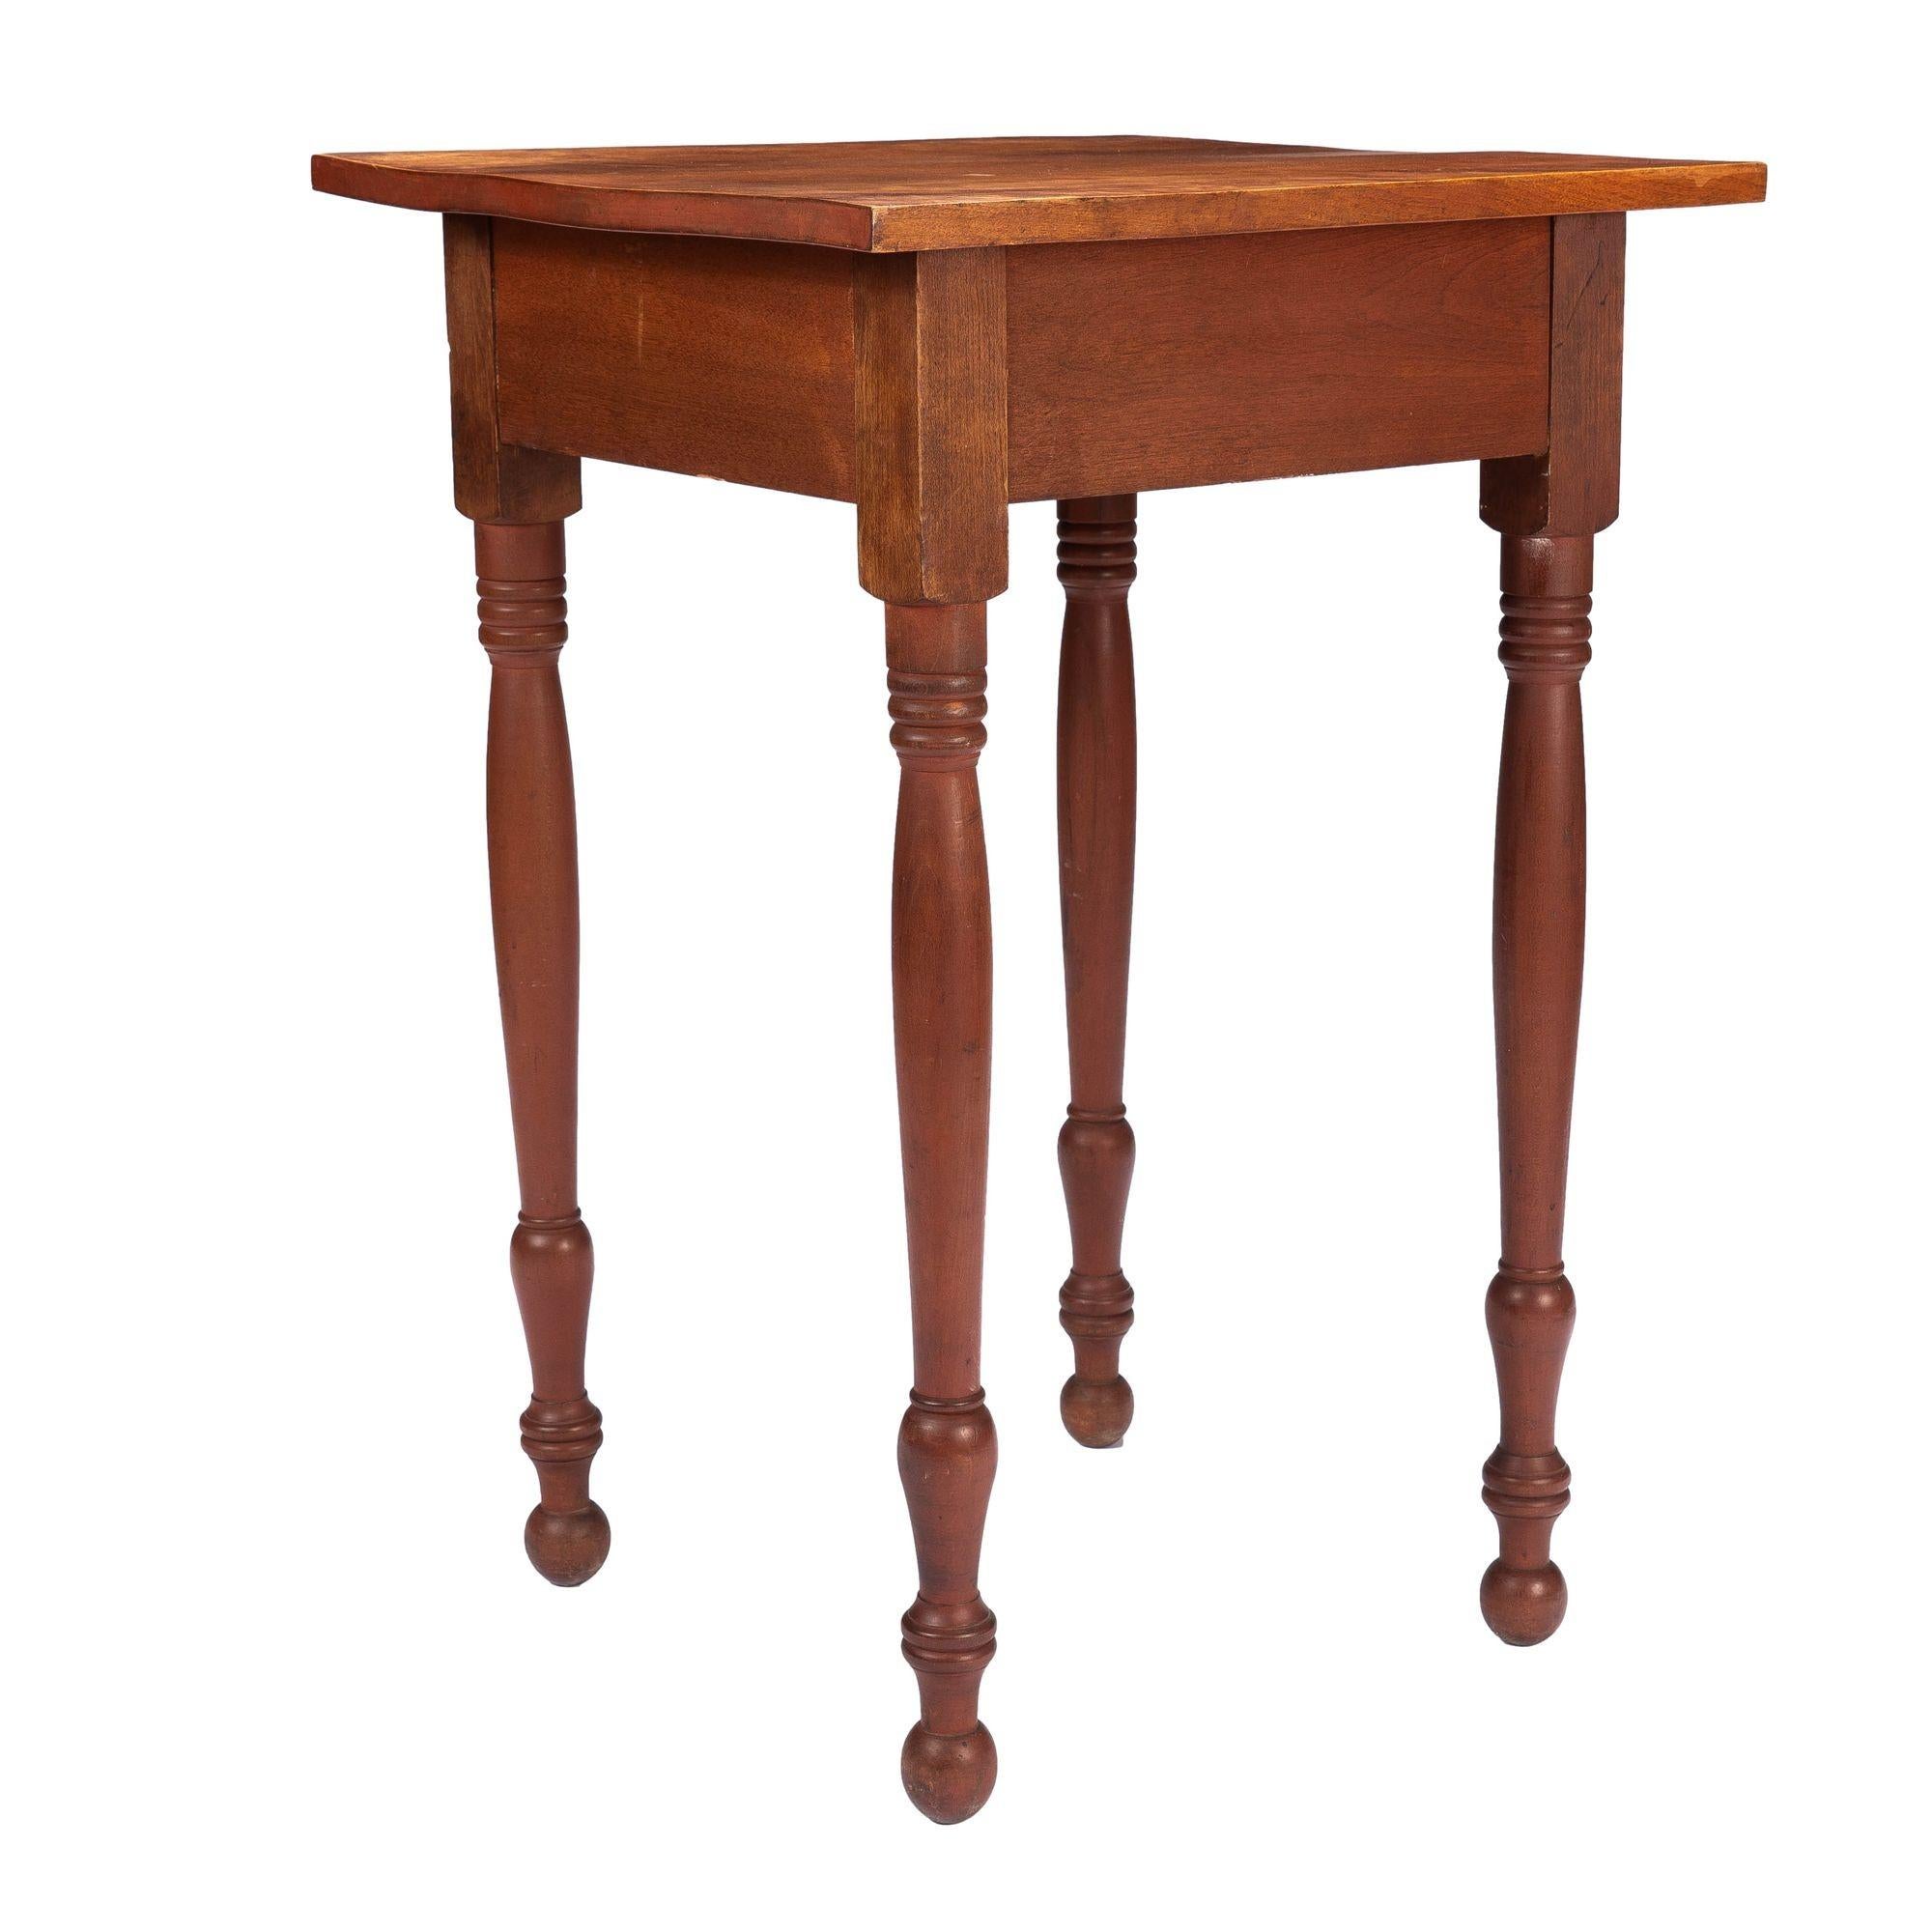 19th Century New England Country Sheraton Stained Birch One Drawer Stand '1830' For Sale